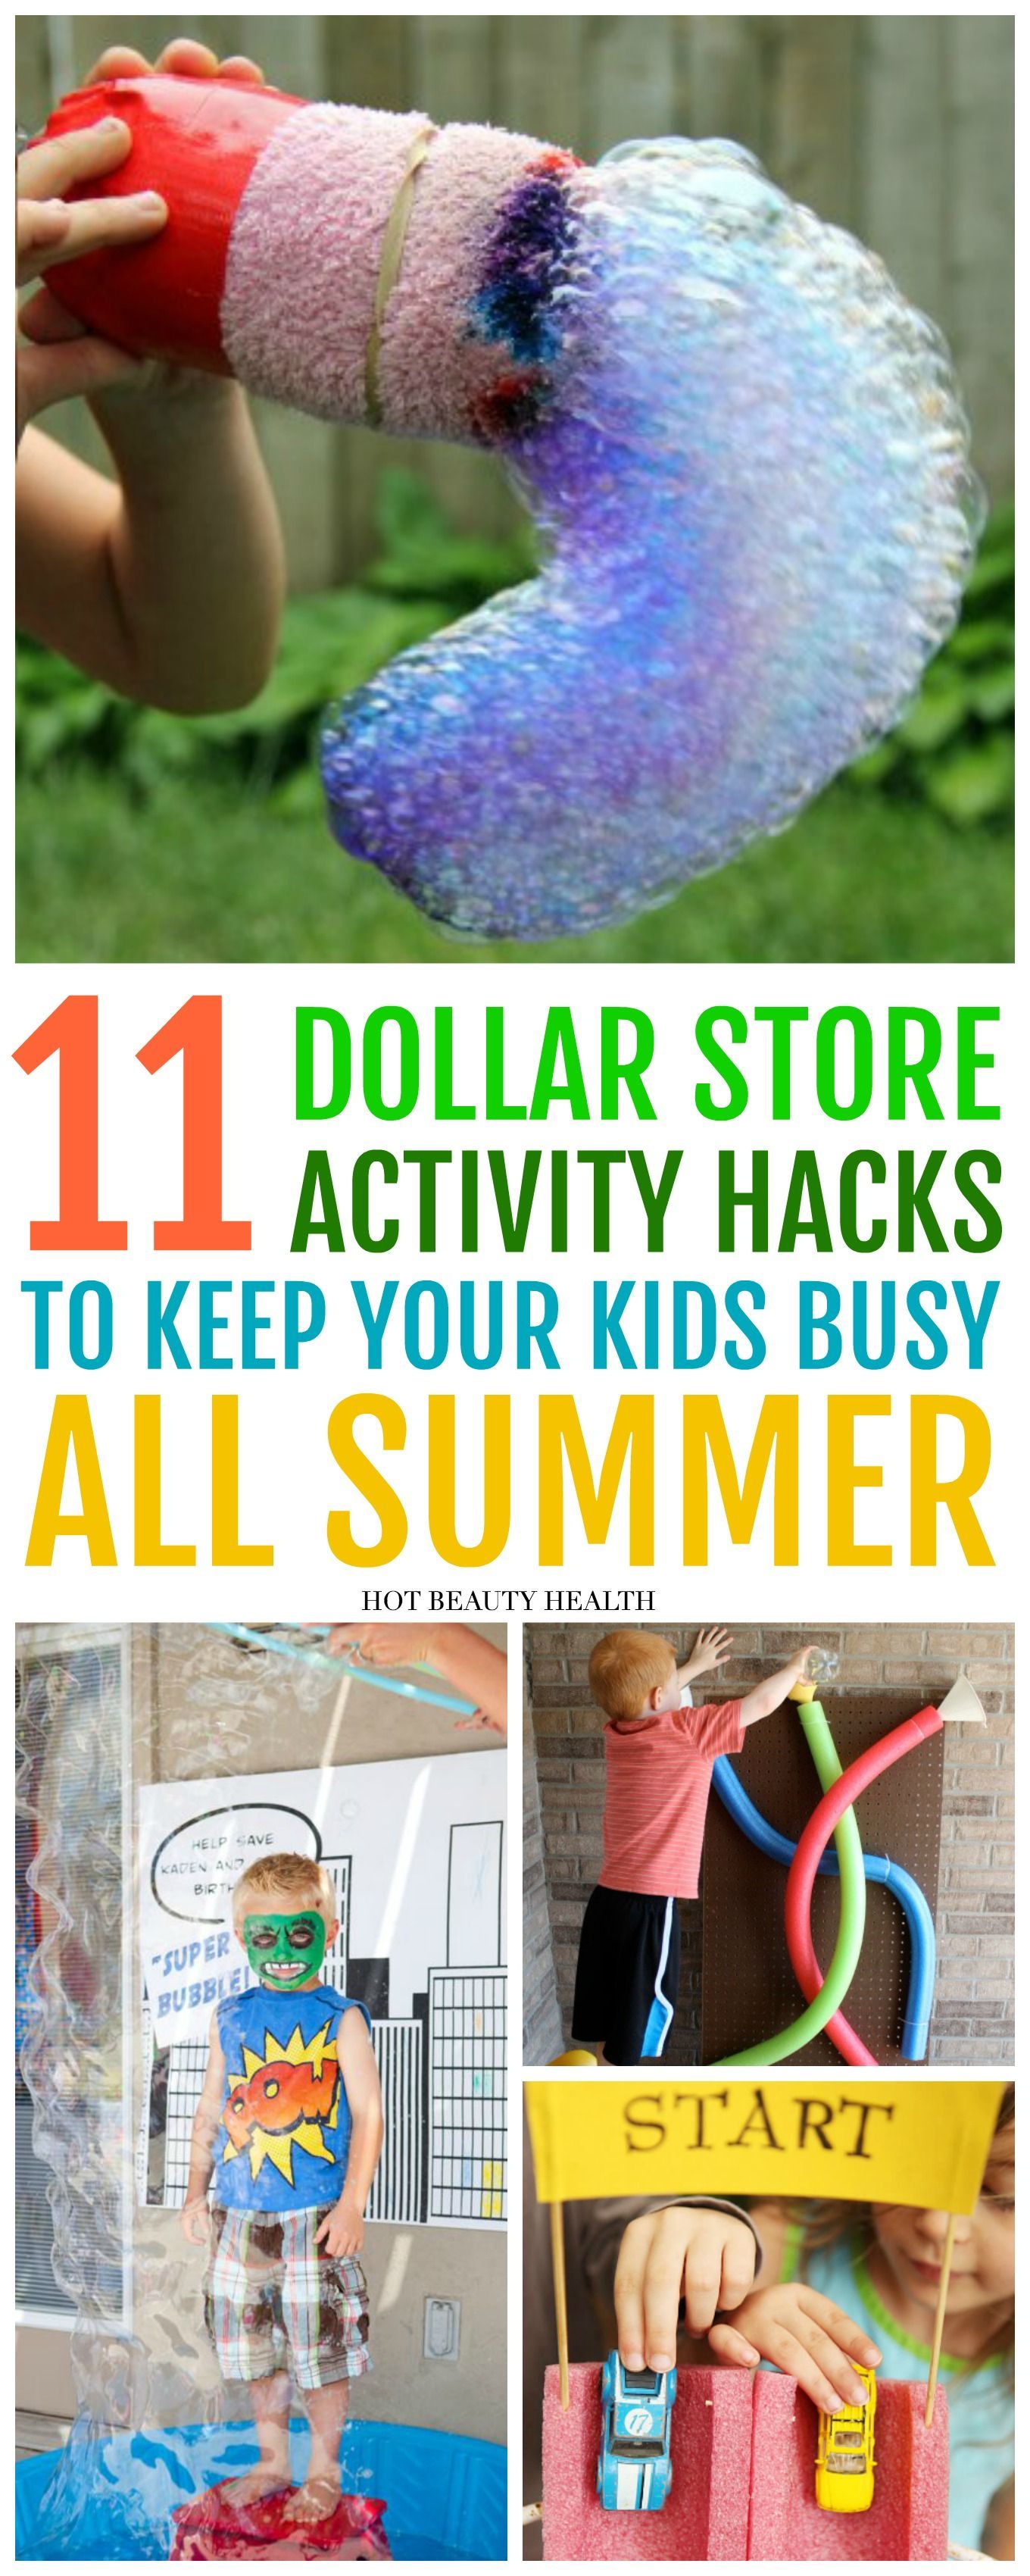 11 Fun Activities to DIY This Summer From The Dollar Store -   17 diy projects Ideas school
 ideas